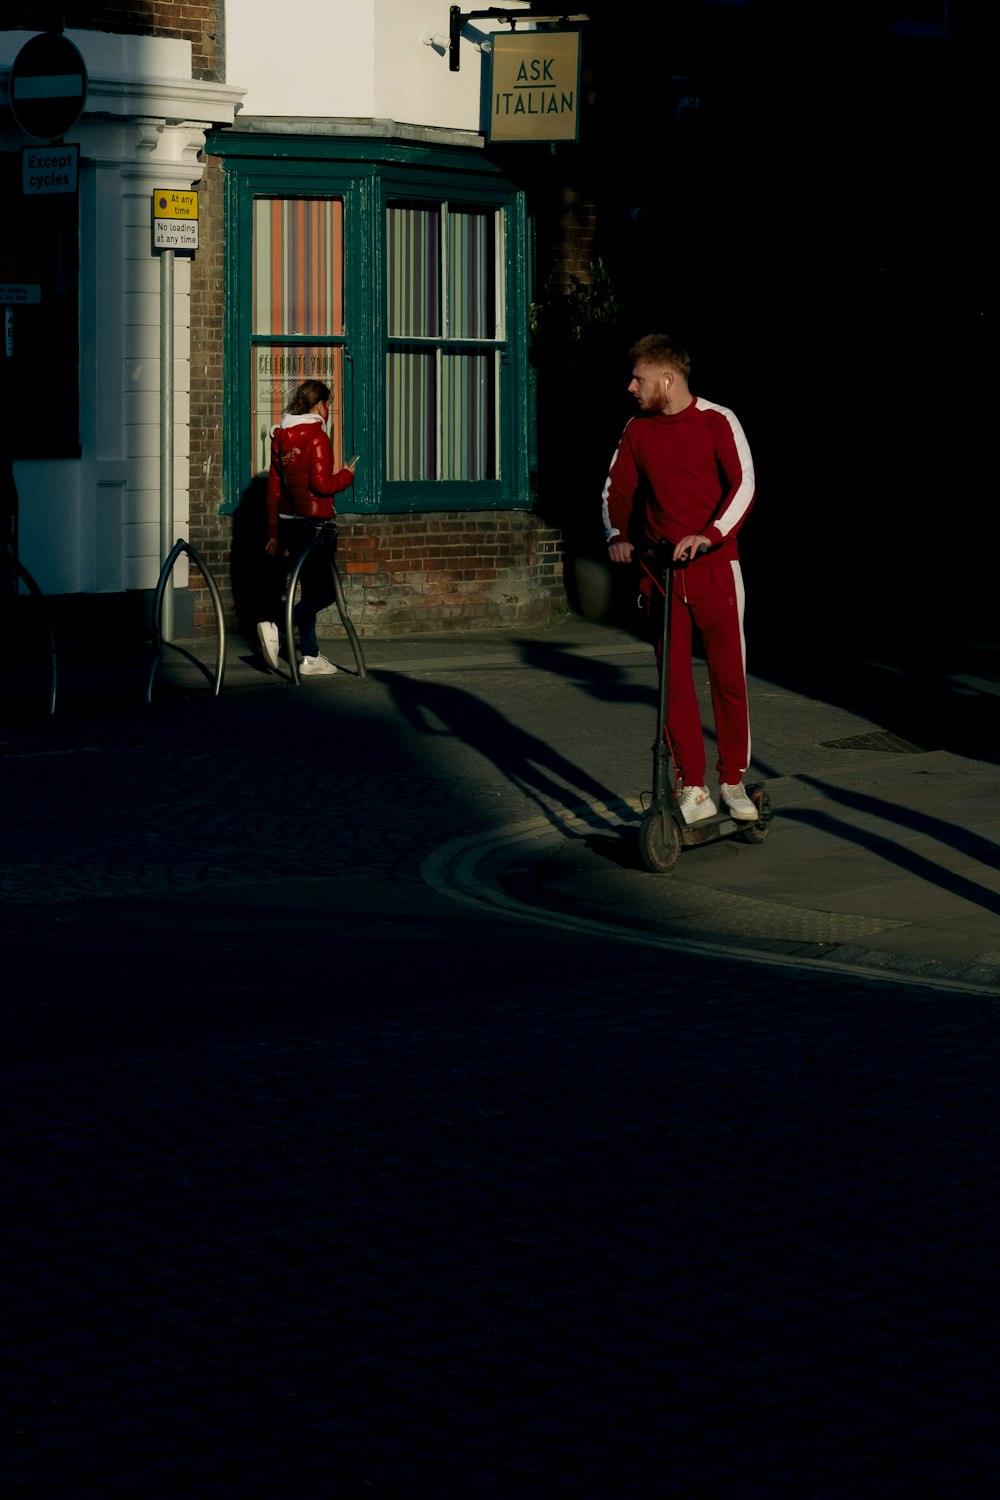 man in red shirt and pants walking with dog during daytime